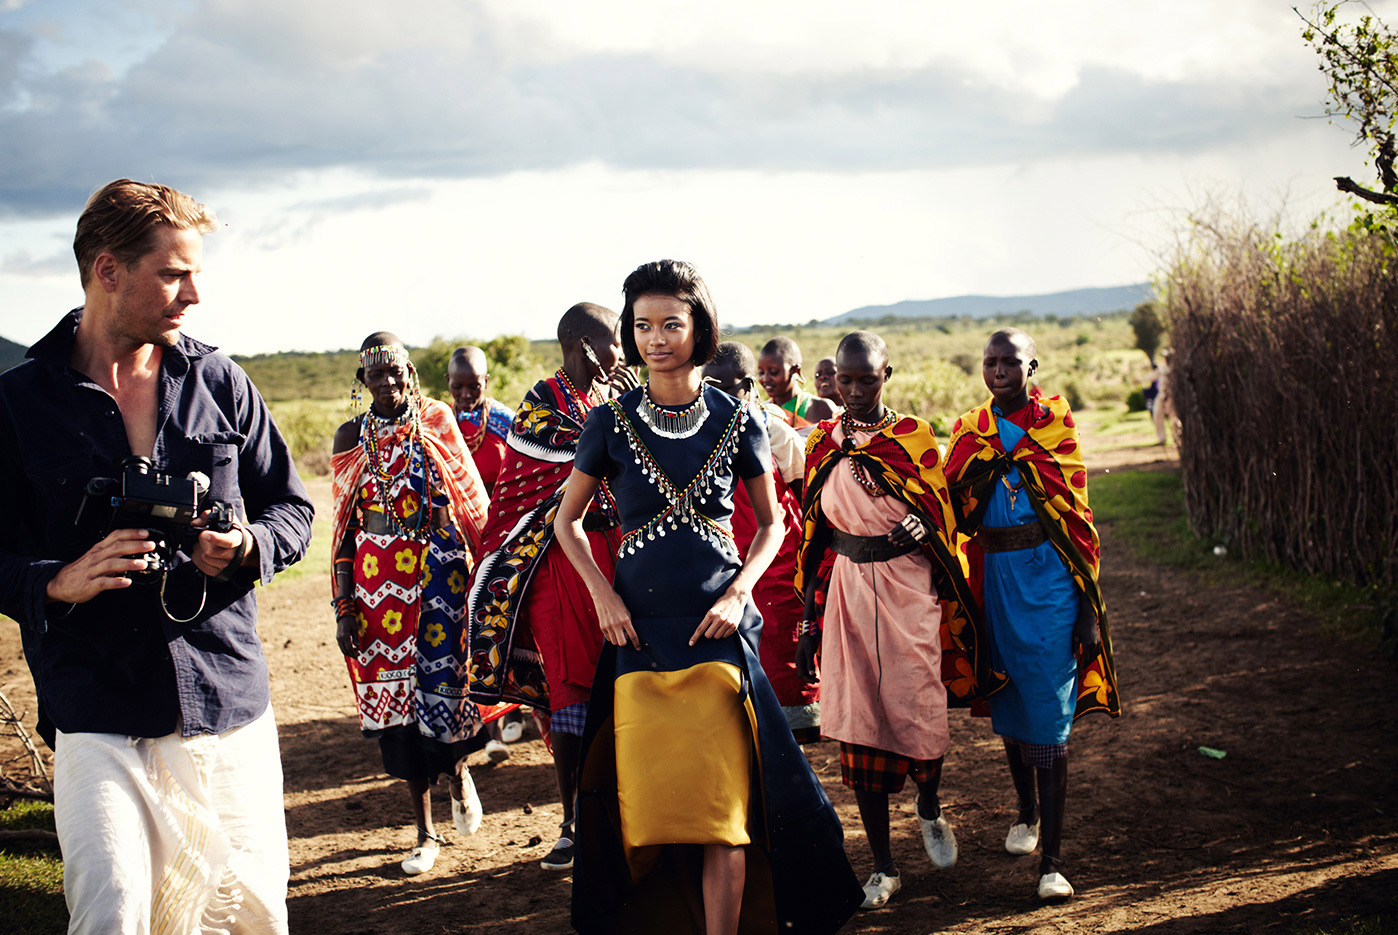 Shooting for Town & Country in Kenya.